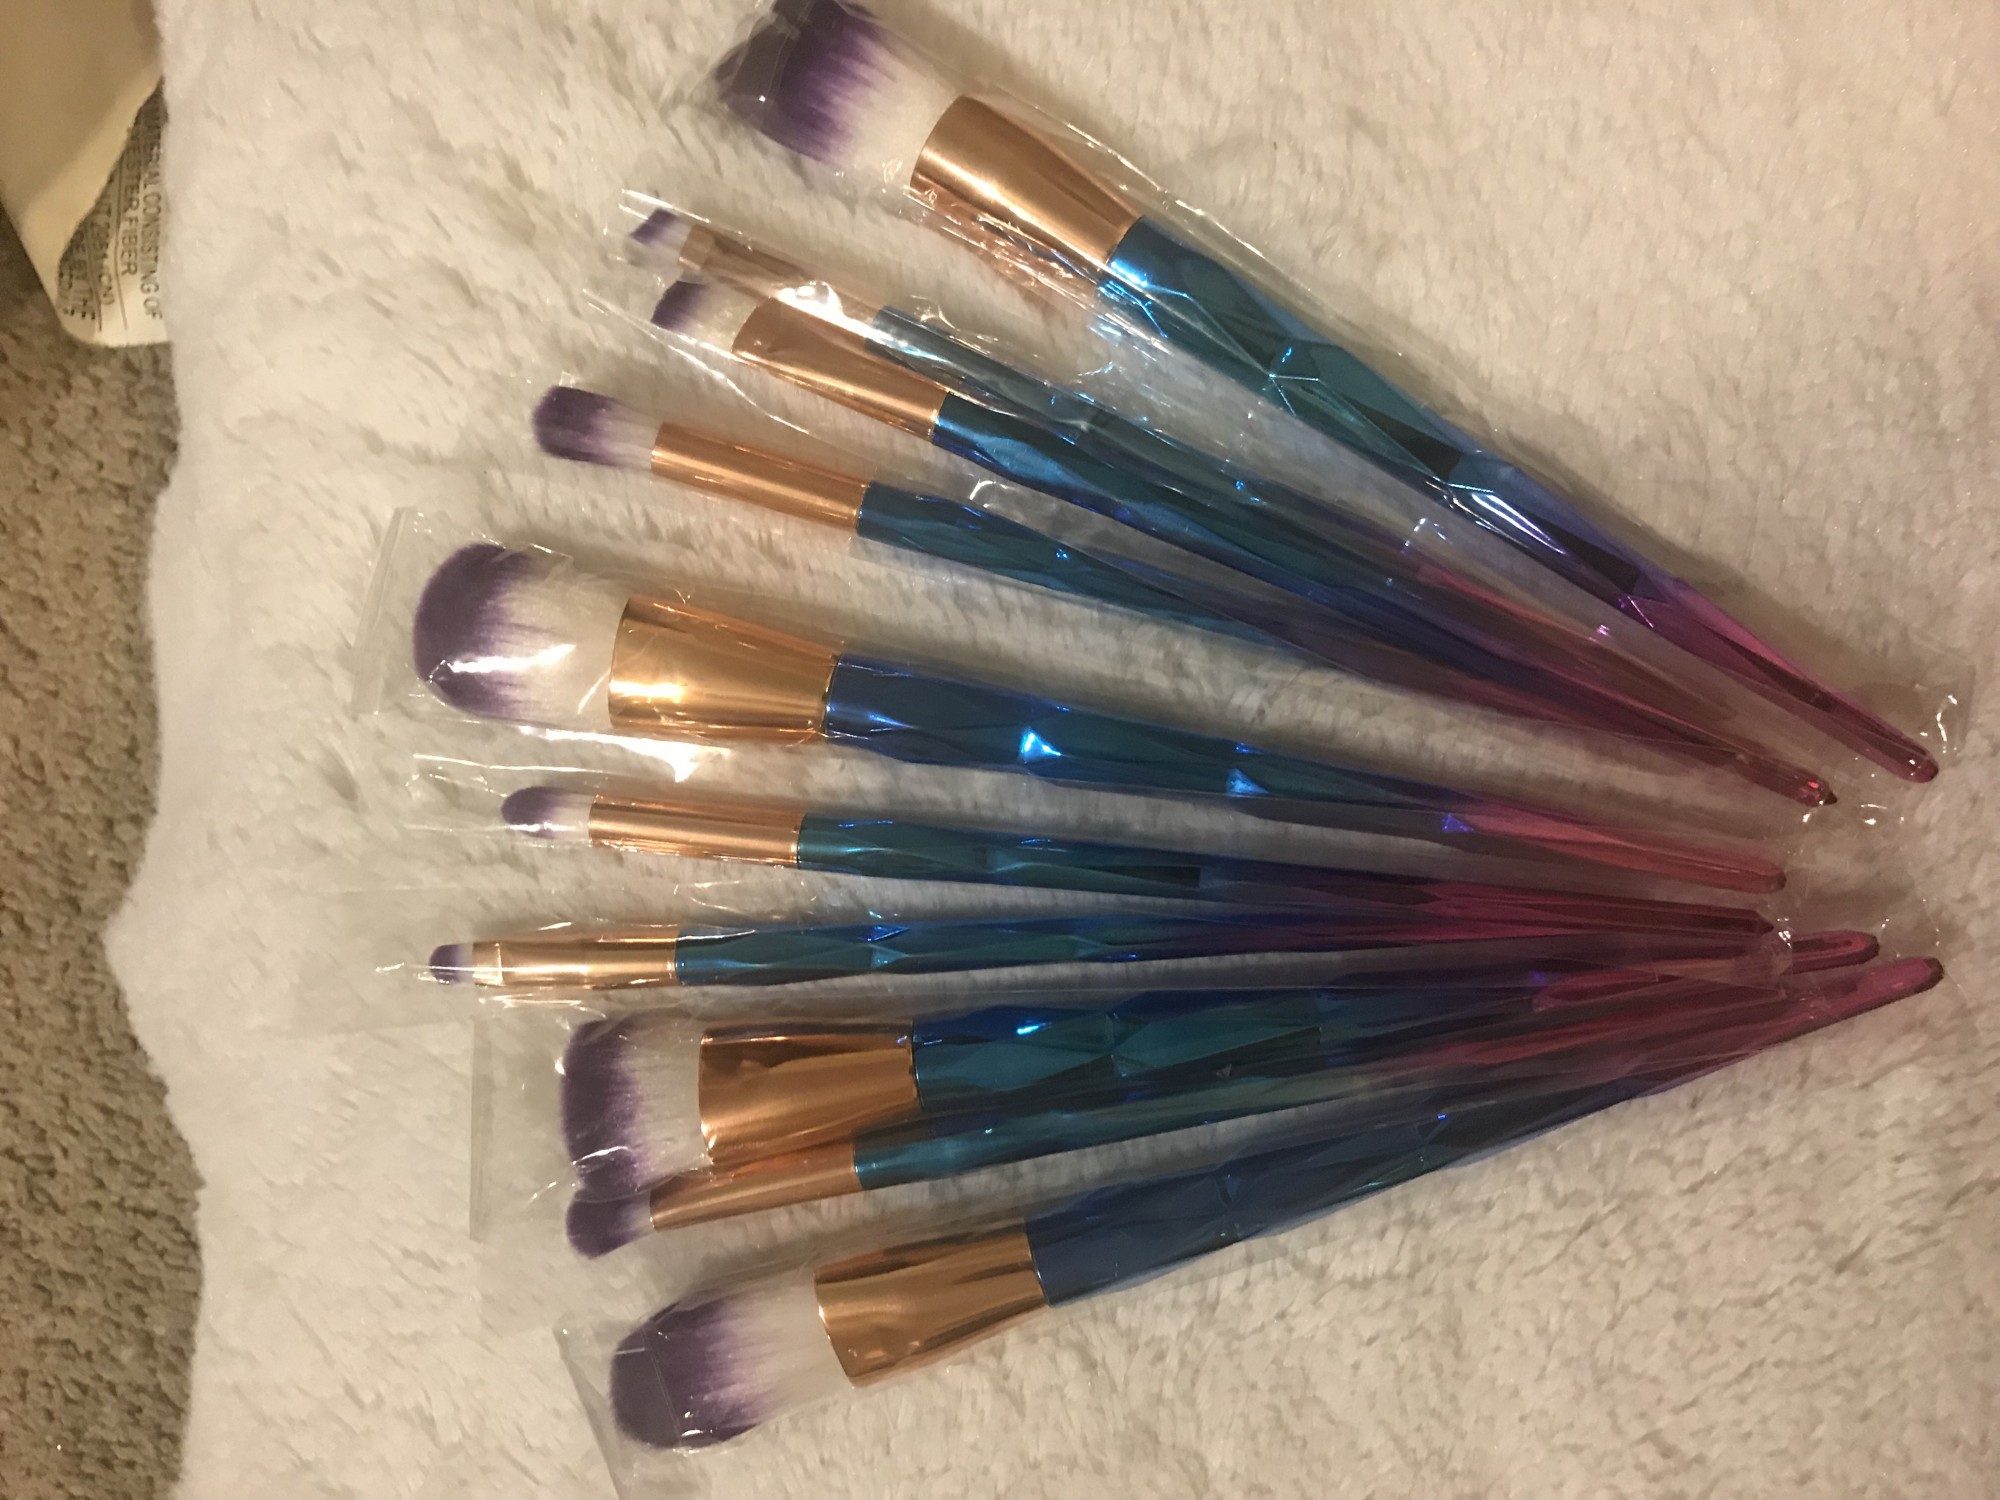 Beautiful and colorful brushes!